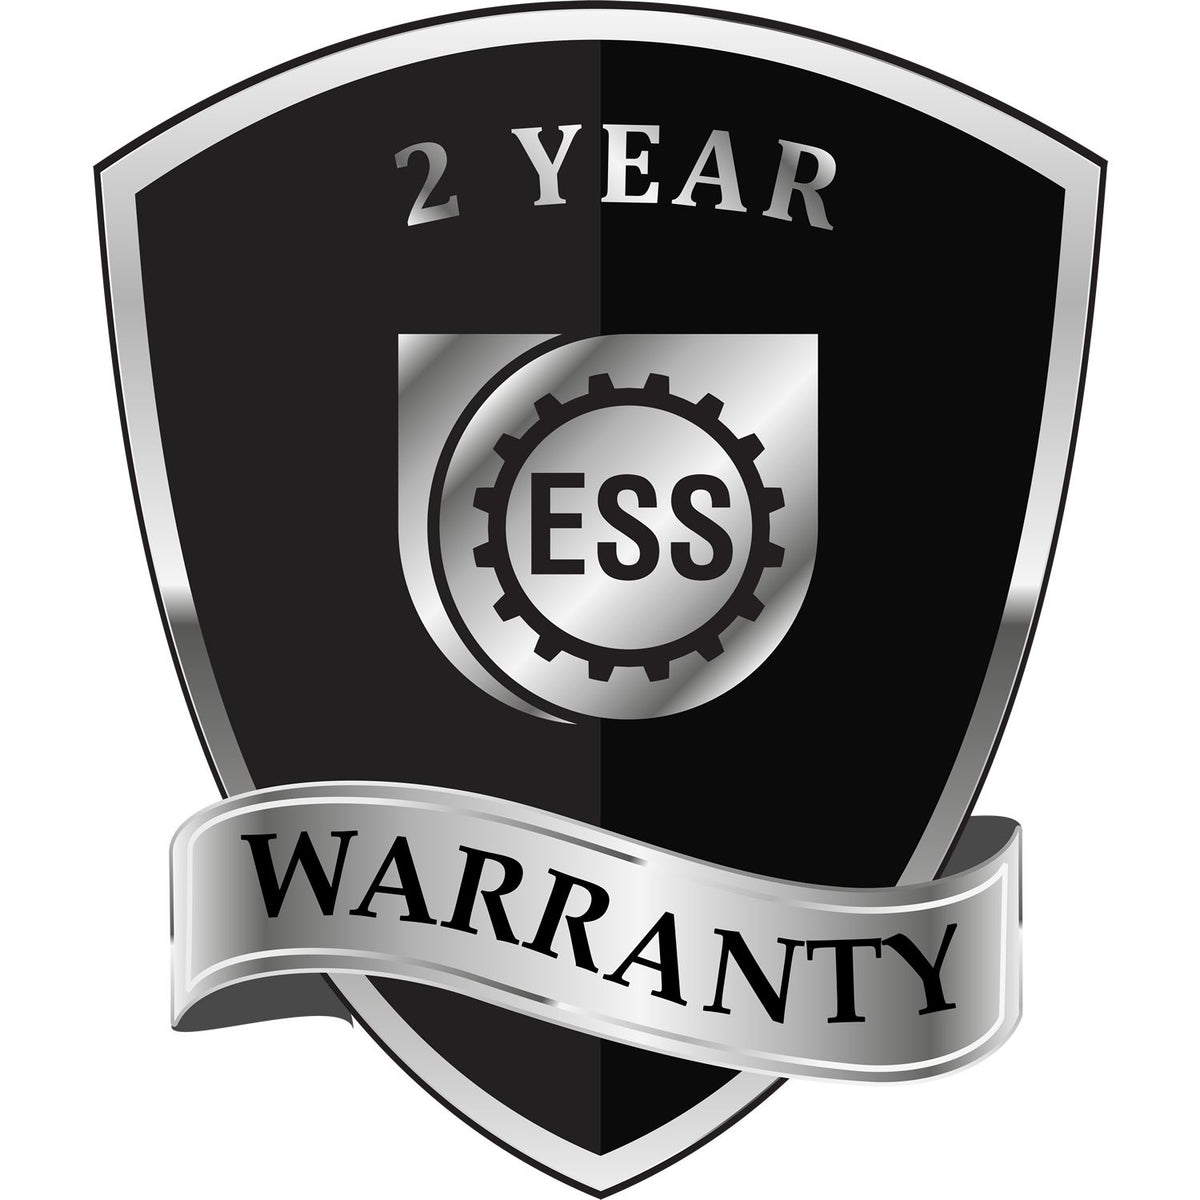 A black and silver badge or emblem showing warranty information for the Gift Kentucky Architect Seal